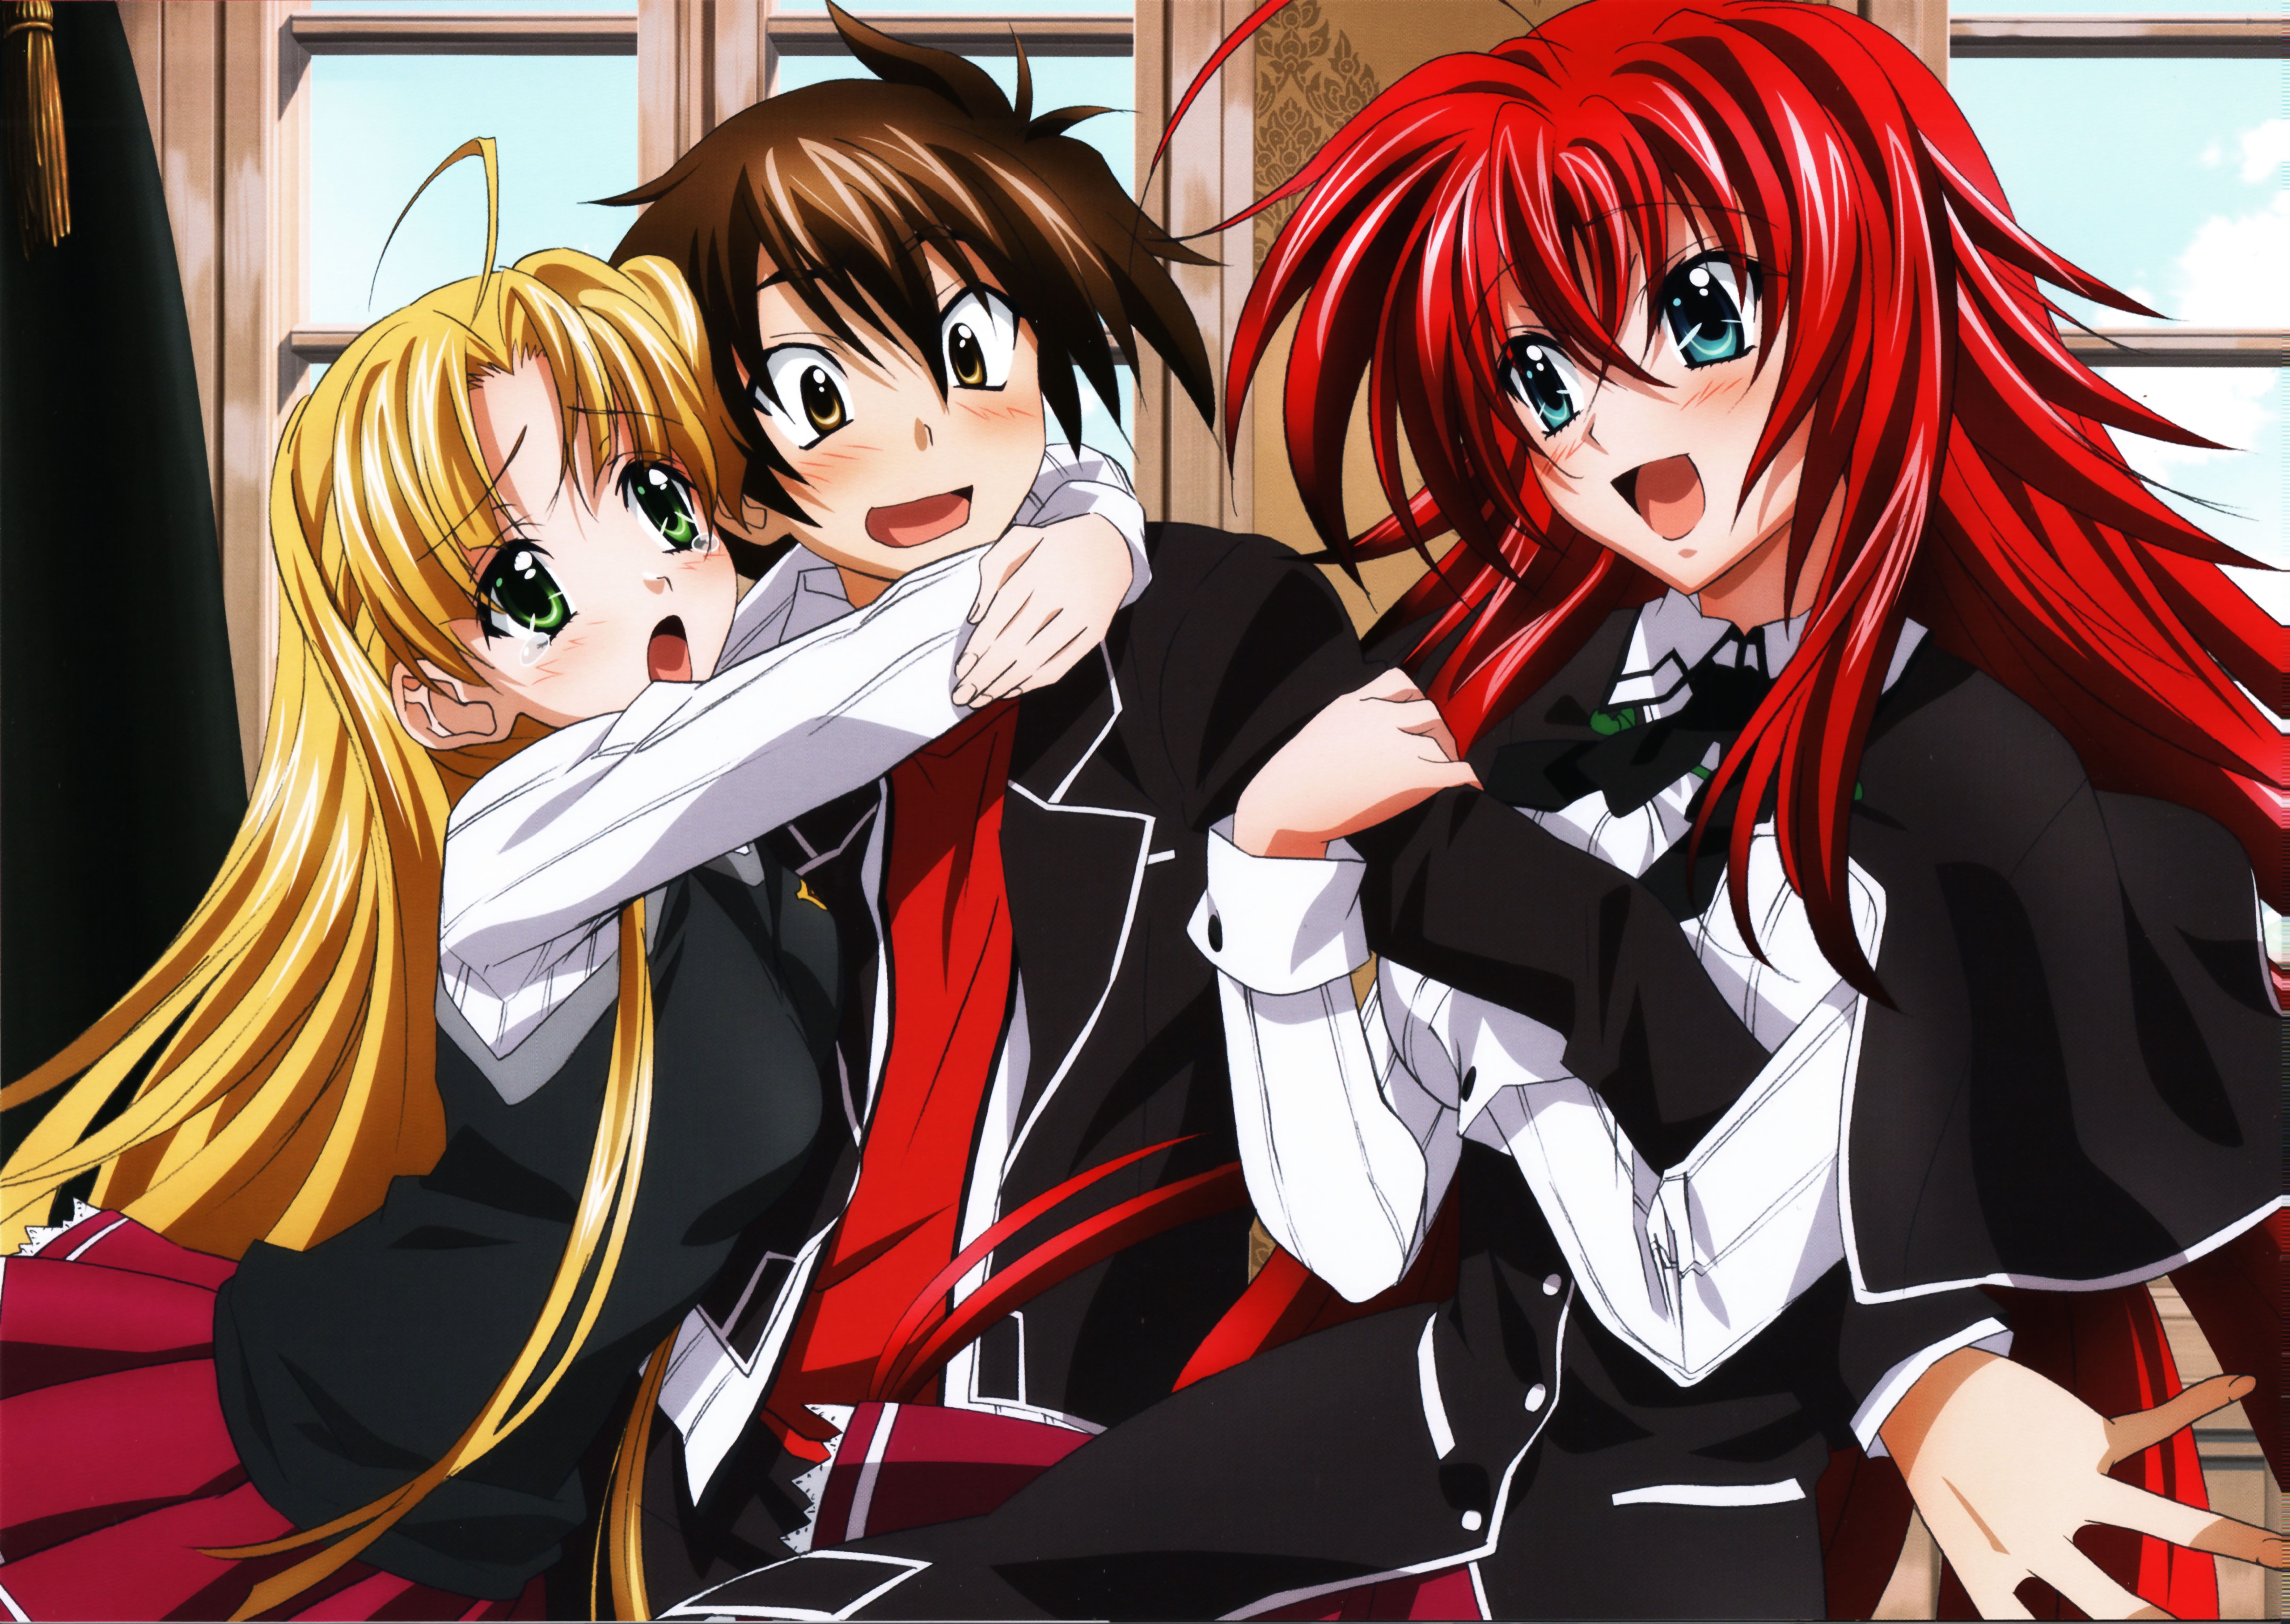 High School DxD Wallpaper. Back to